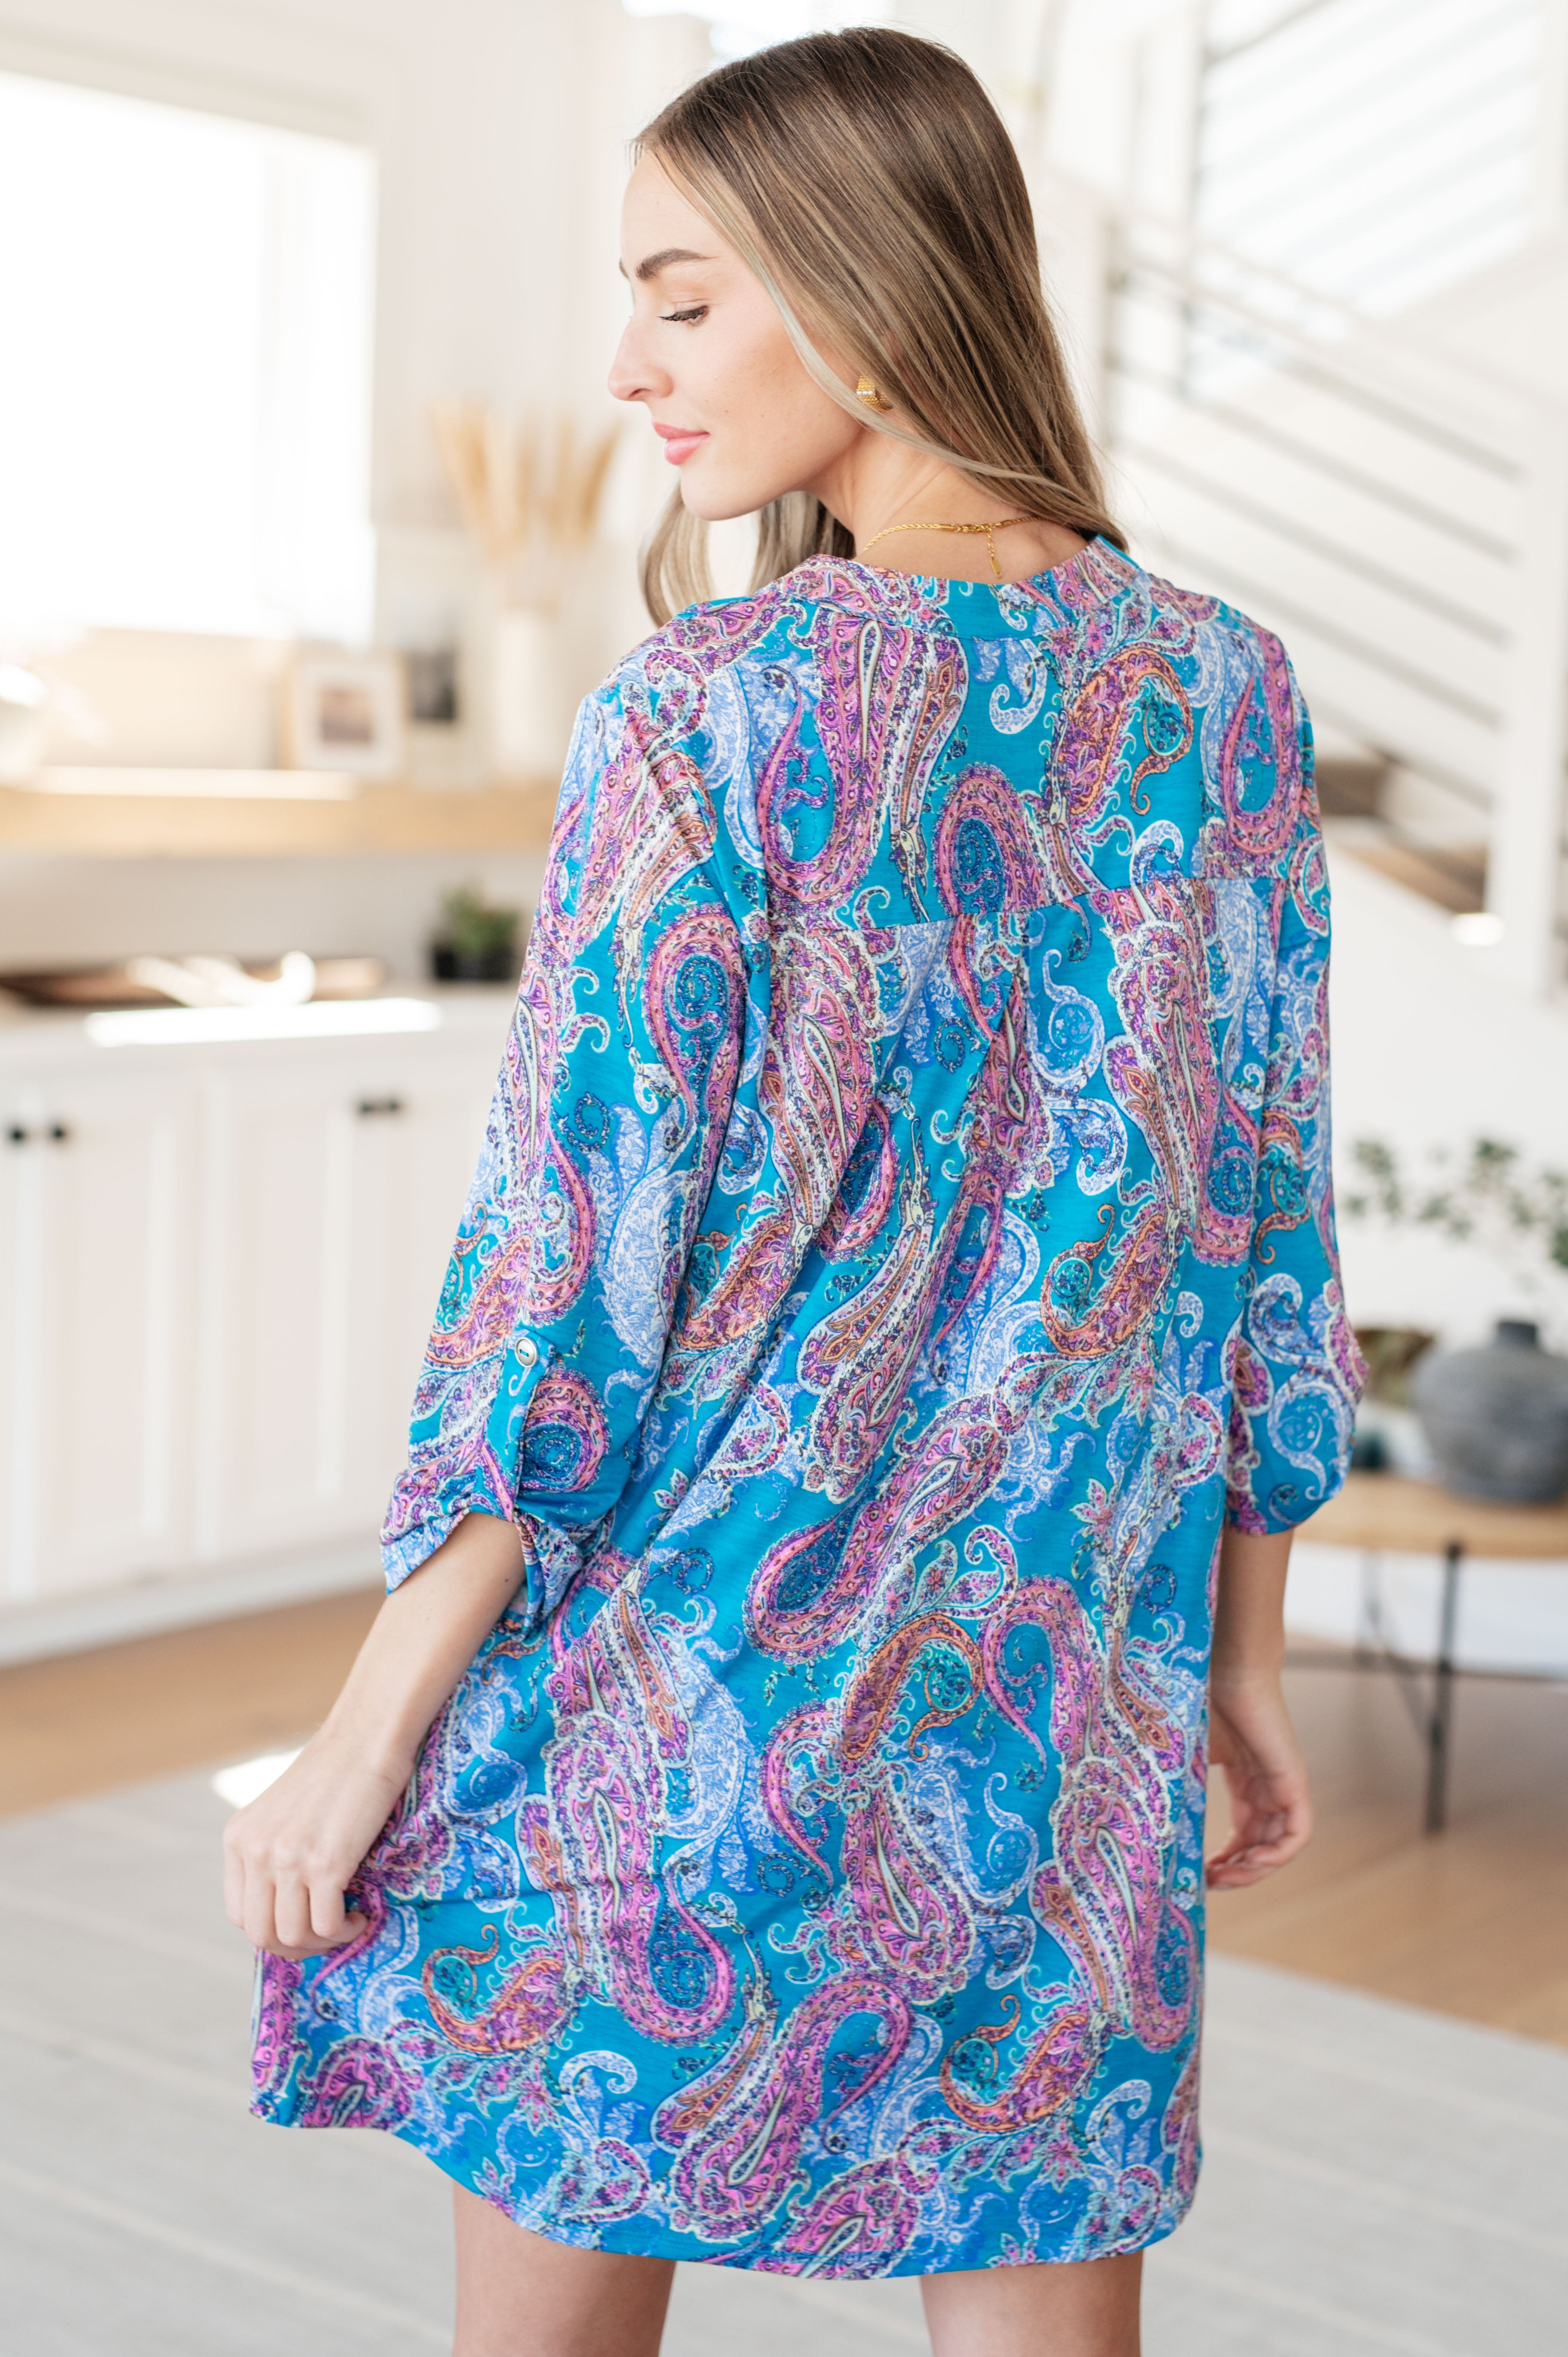 Lizzy Dress in Teal and Pink Paisley Ave Shops